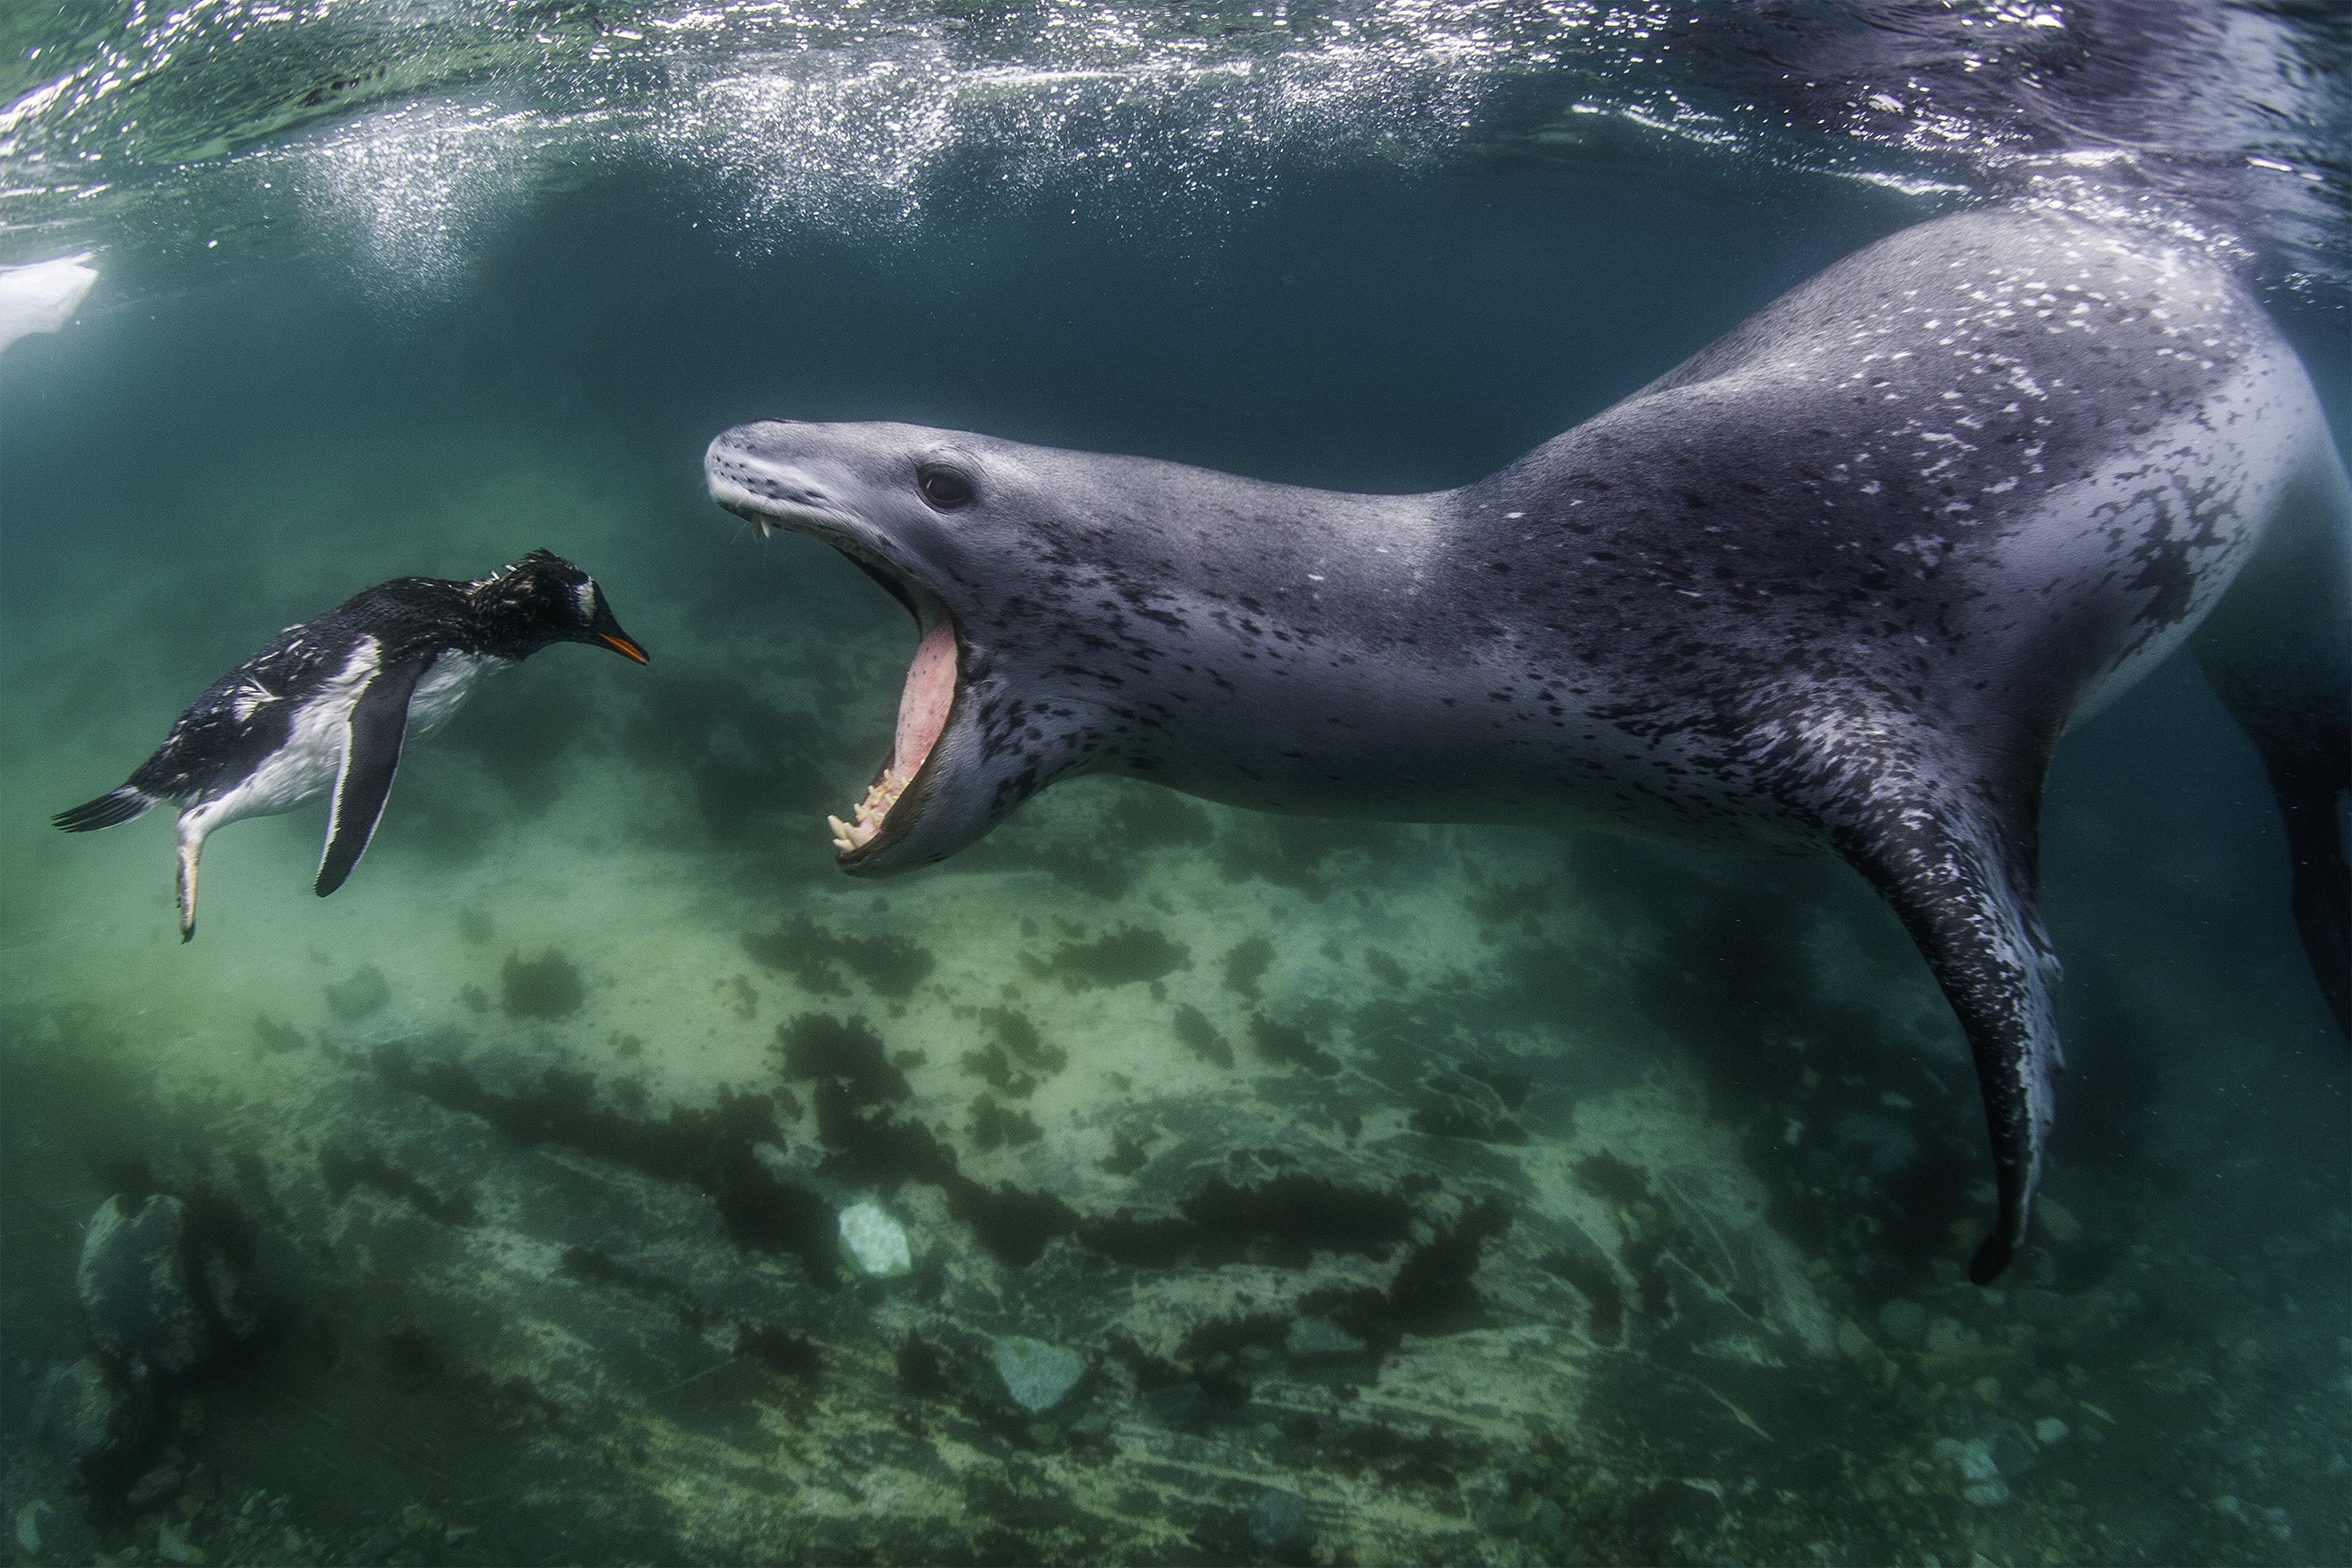 These Award-Winning Photos Zoom In on Intimate Animal Moments